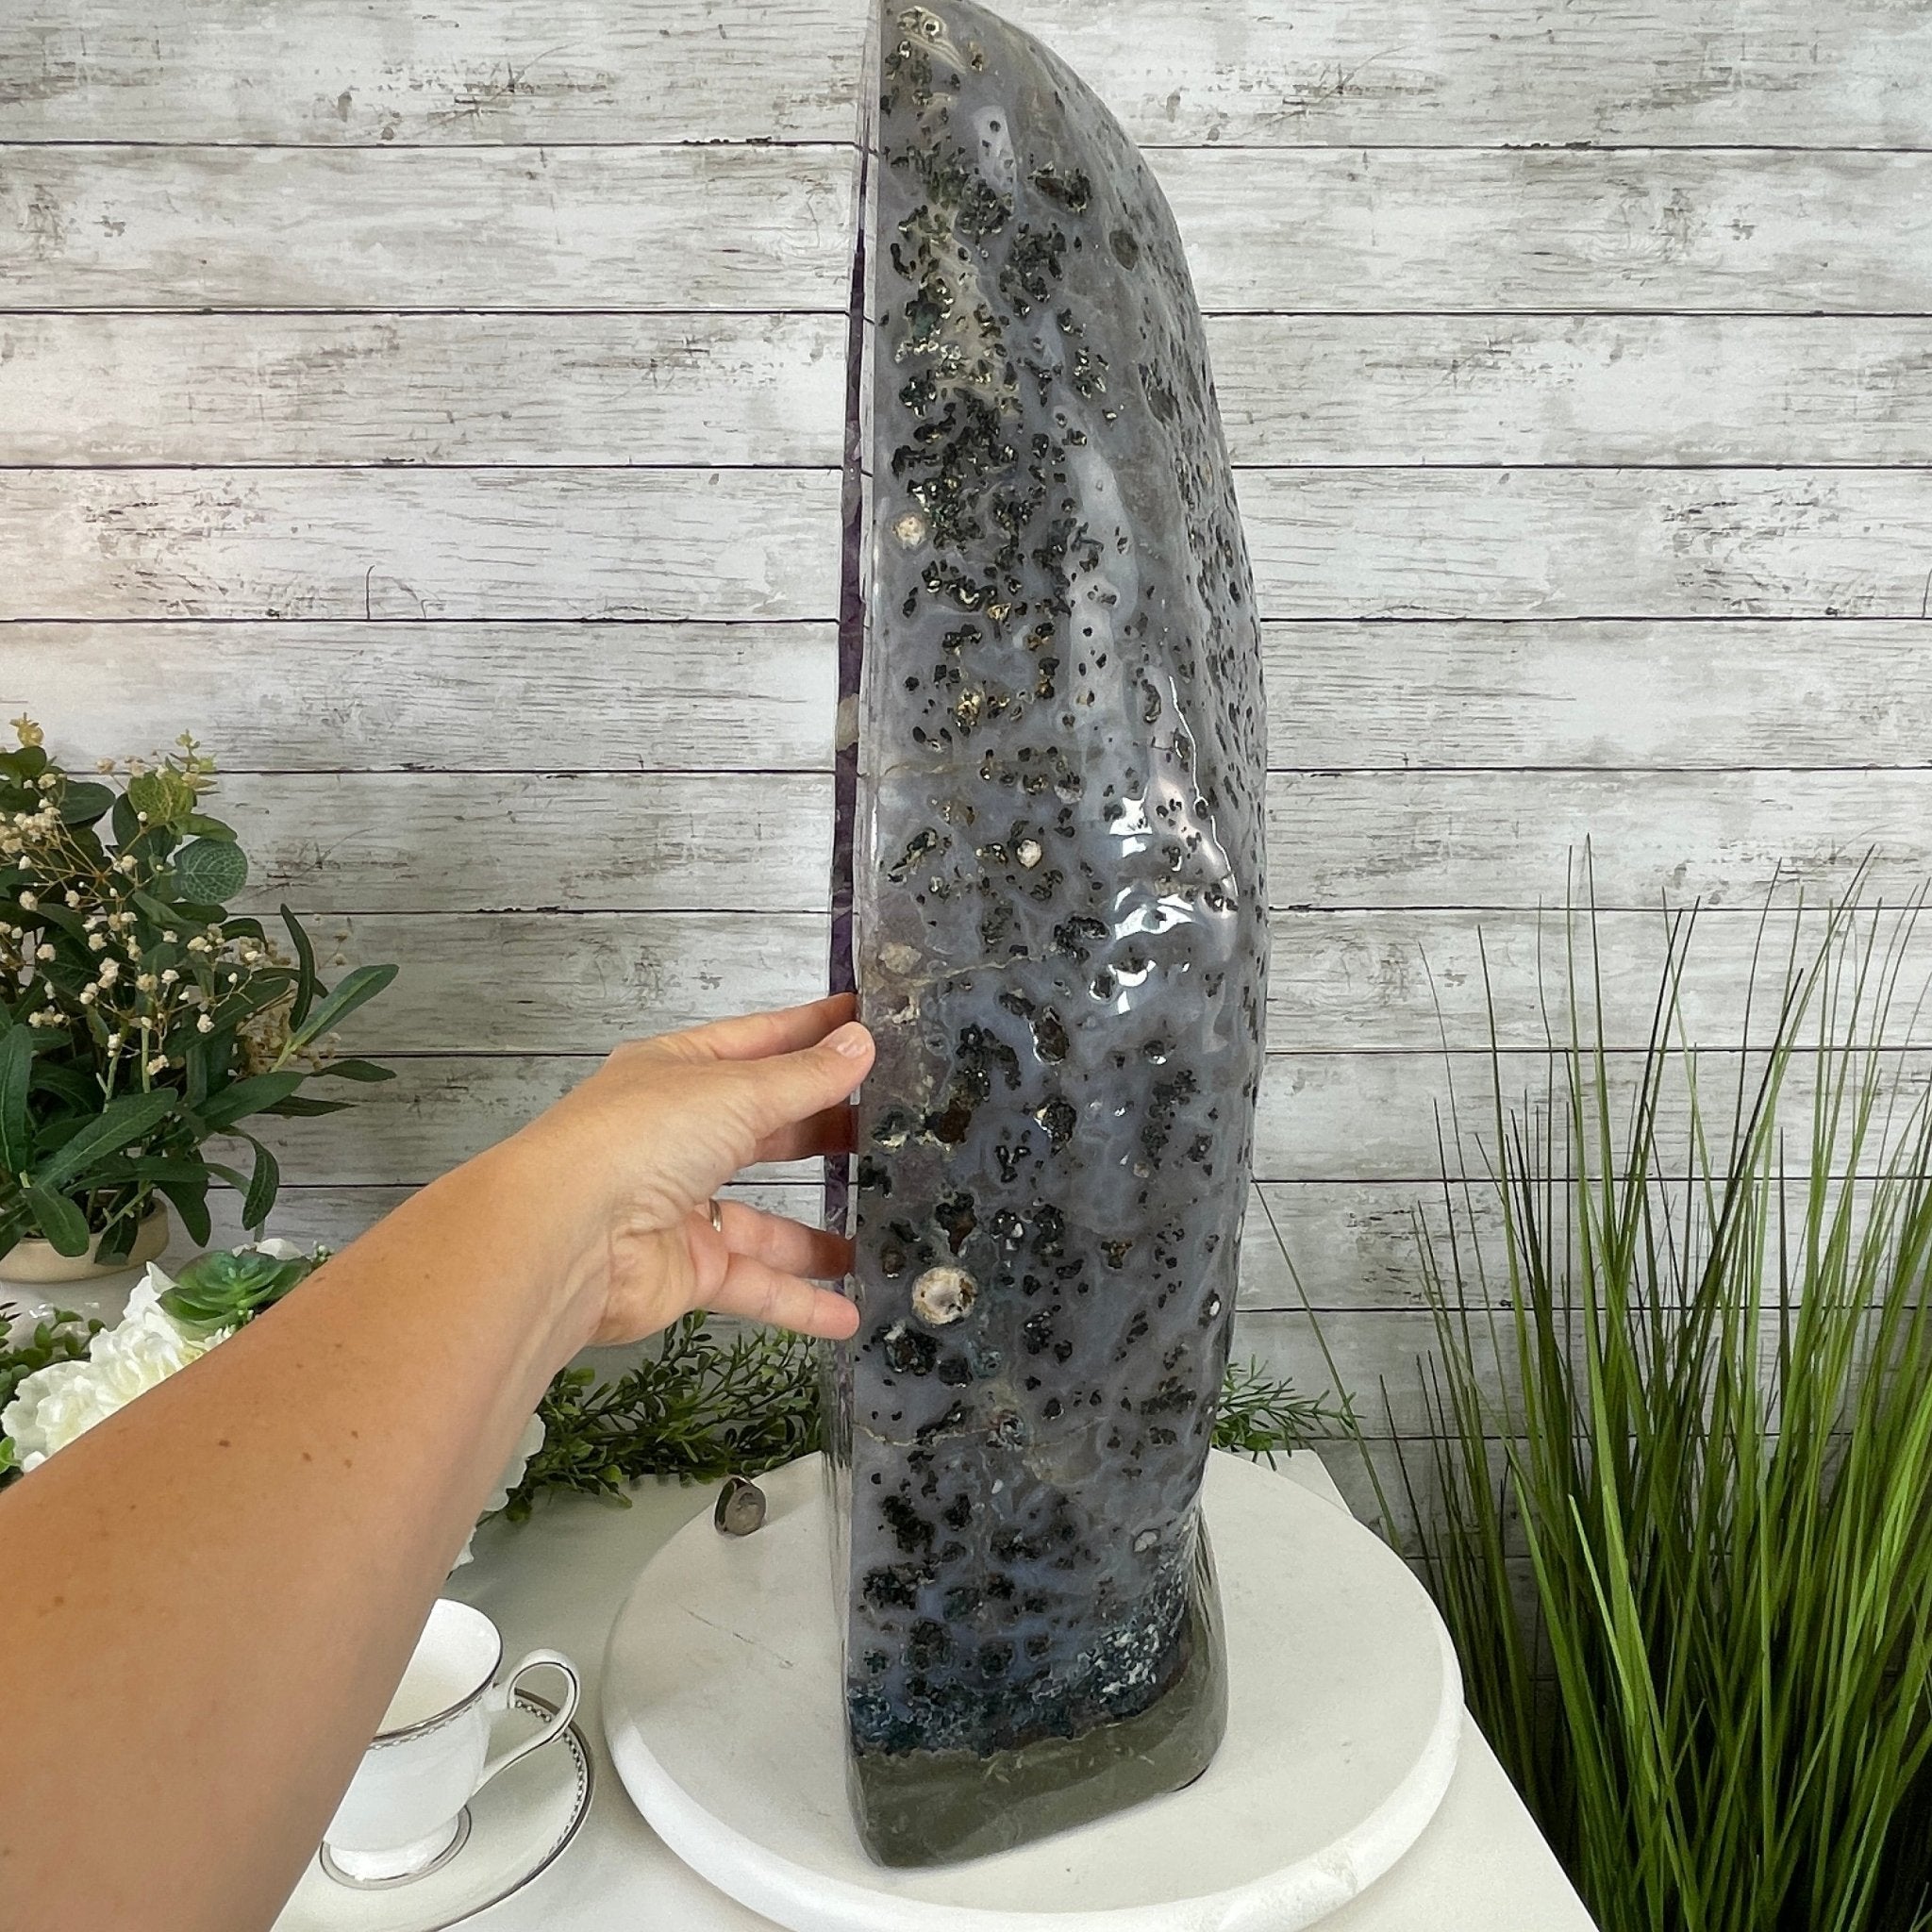 Extra Quality Polished Brazilian Amethyst Cathedral, 93.4 lbs & 26.75" tall Model #5602-0138 by Brazil Gems - Brazil GemsBrazil GemsExtra Quality Polished Brazilian Amethyst Cathedral, 93.4 lbs & 26.75" tall Model #5602-0138 by Brazil GemsPolished Cathedrals5602-0138